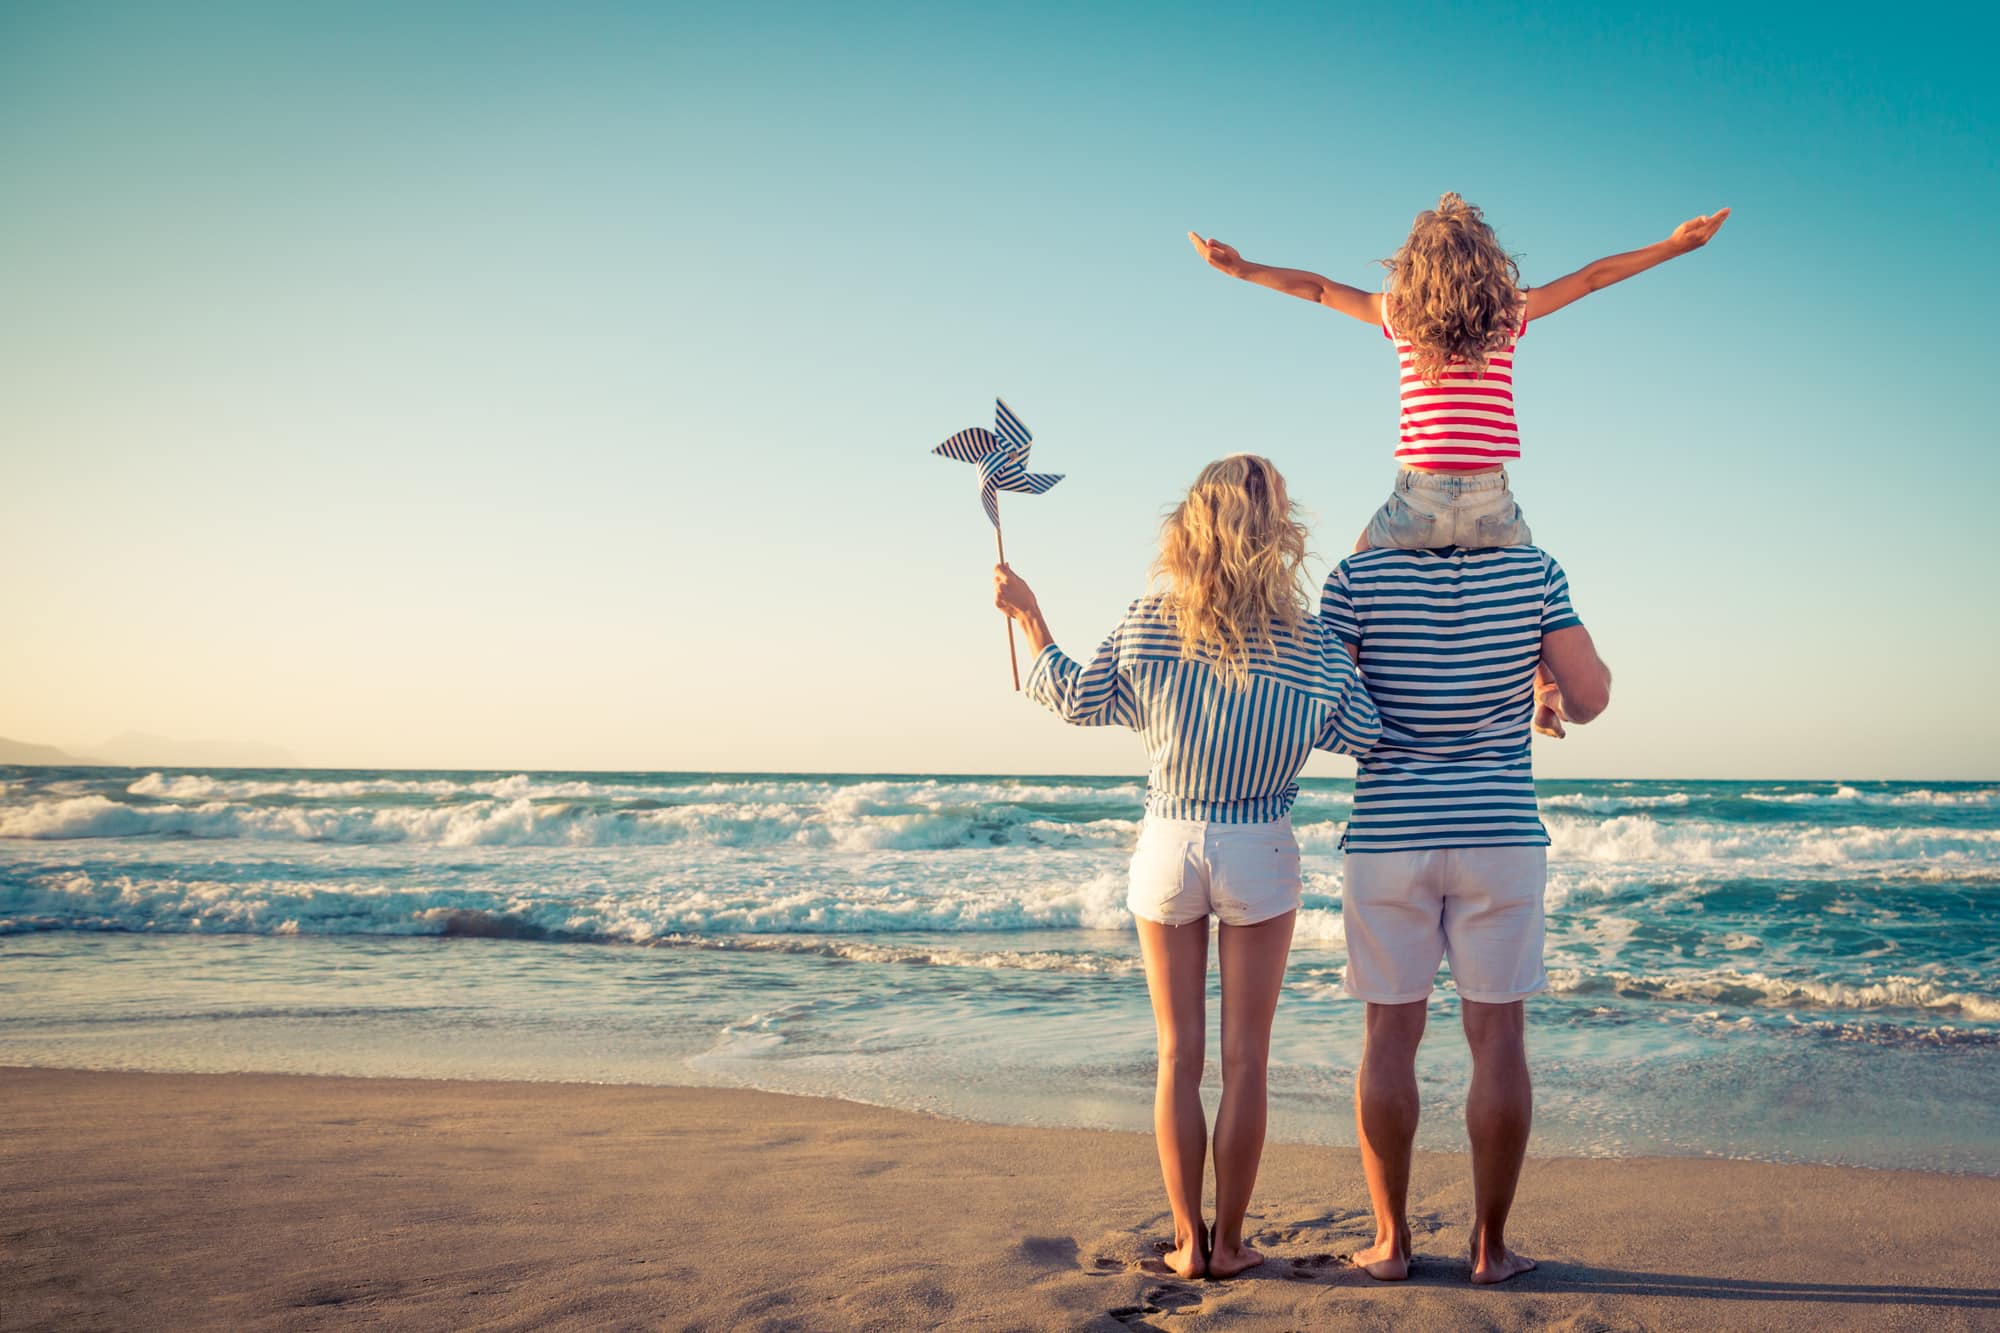 A joyful family on the beach, arms raised in celebration, enjoying a budget-friendly holiday together.